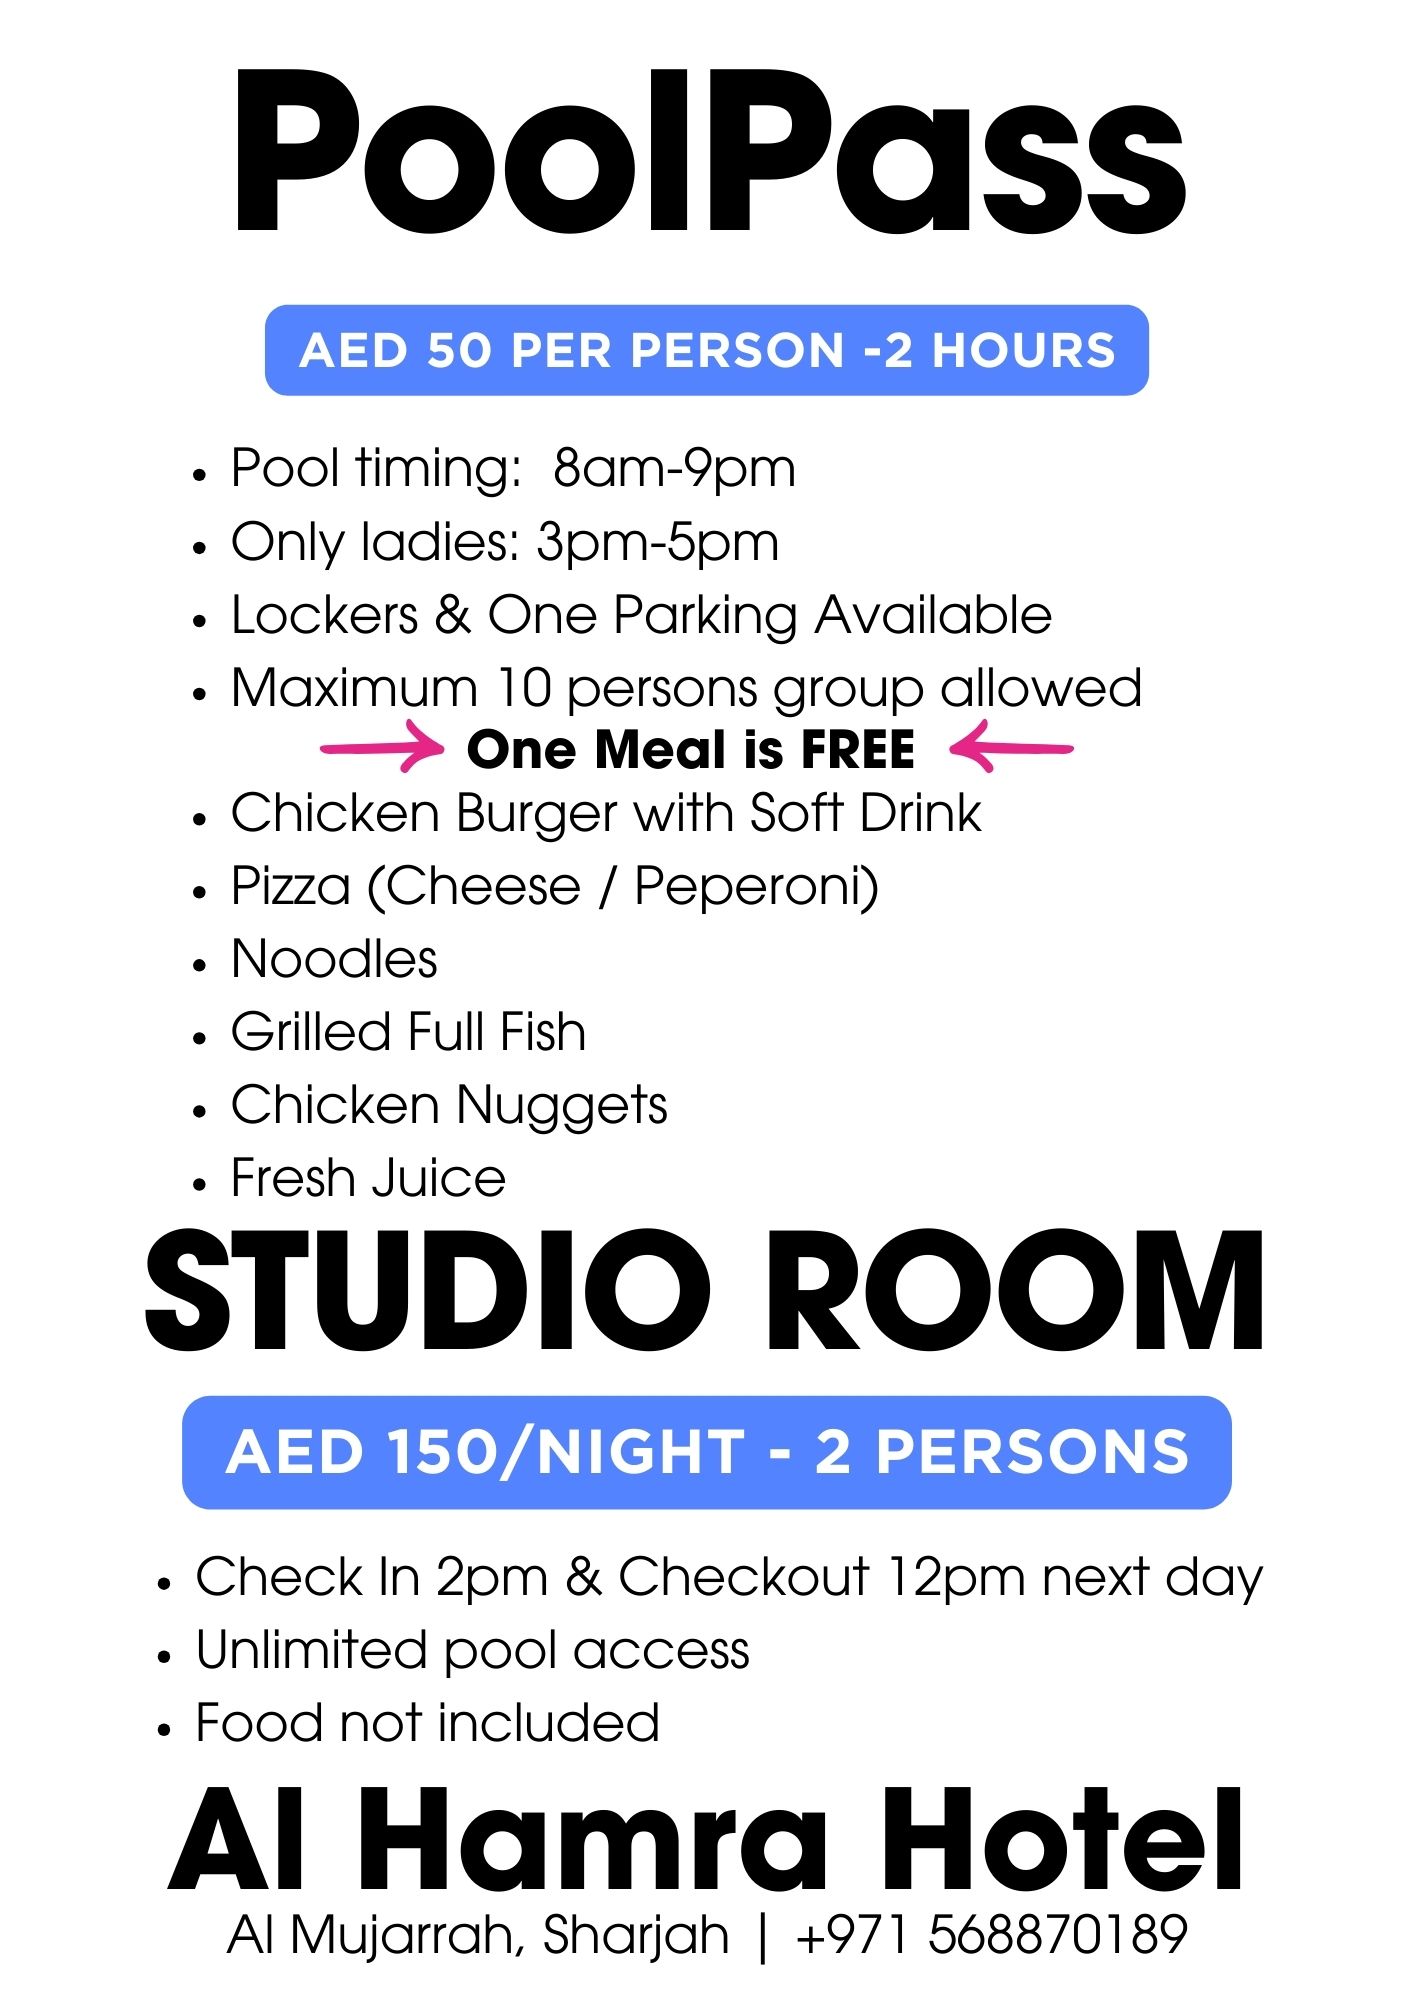 POOL PASS WITH FREE MEAL